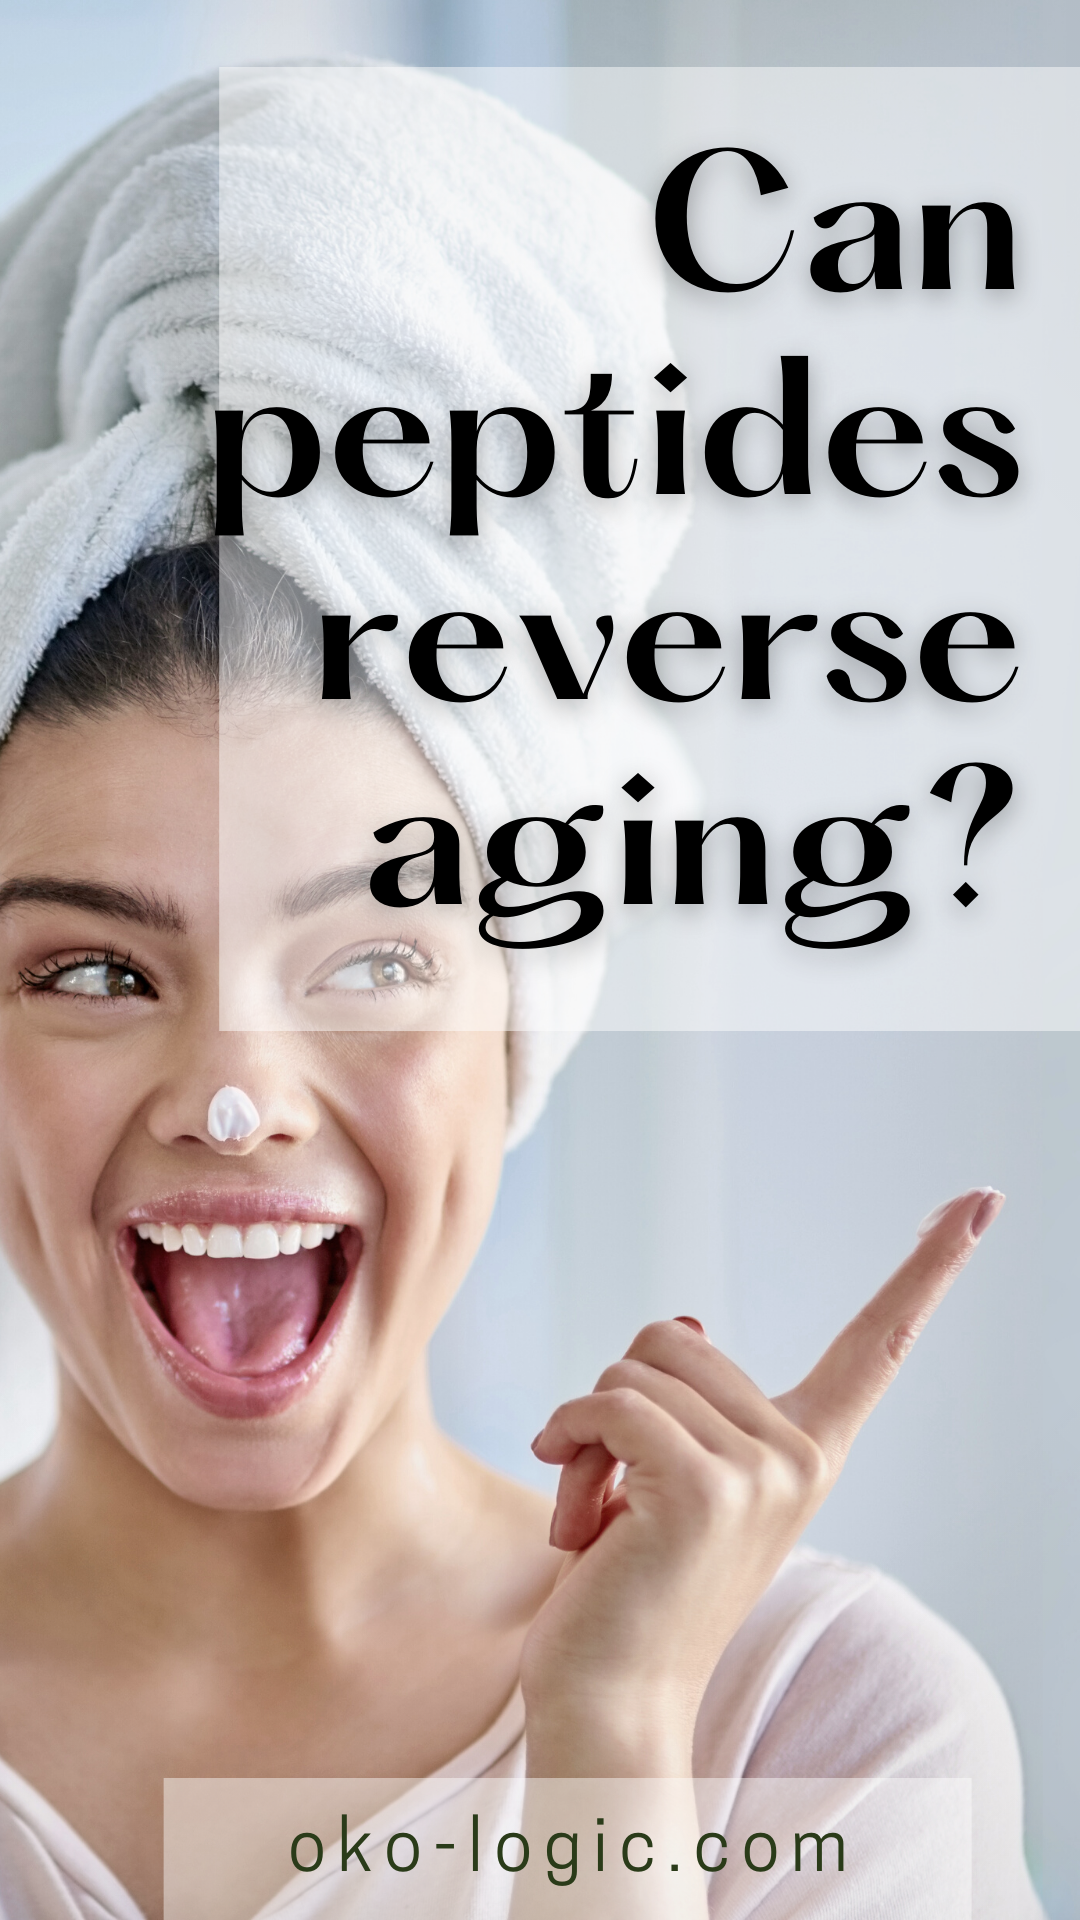 What Are the Most Important Benefits of Peptides for Your Skin